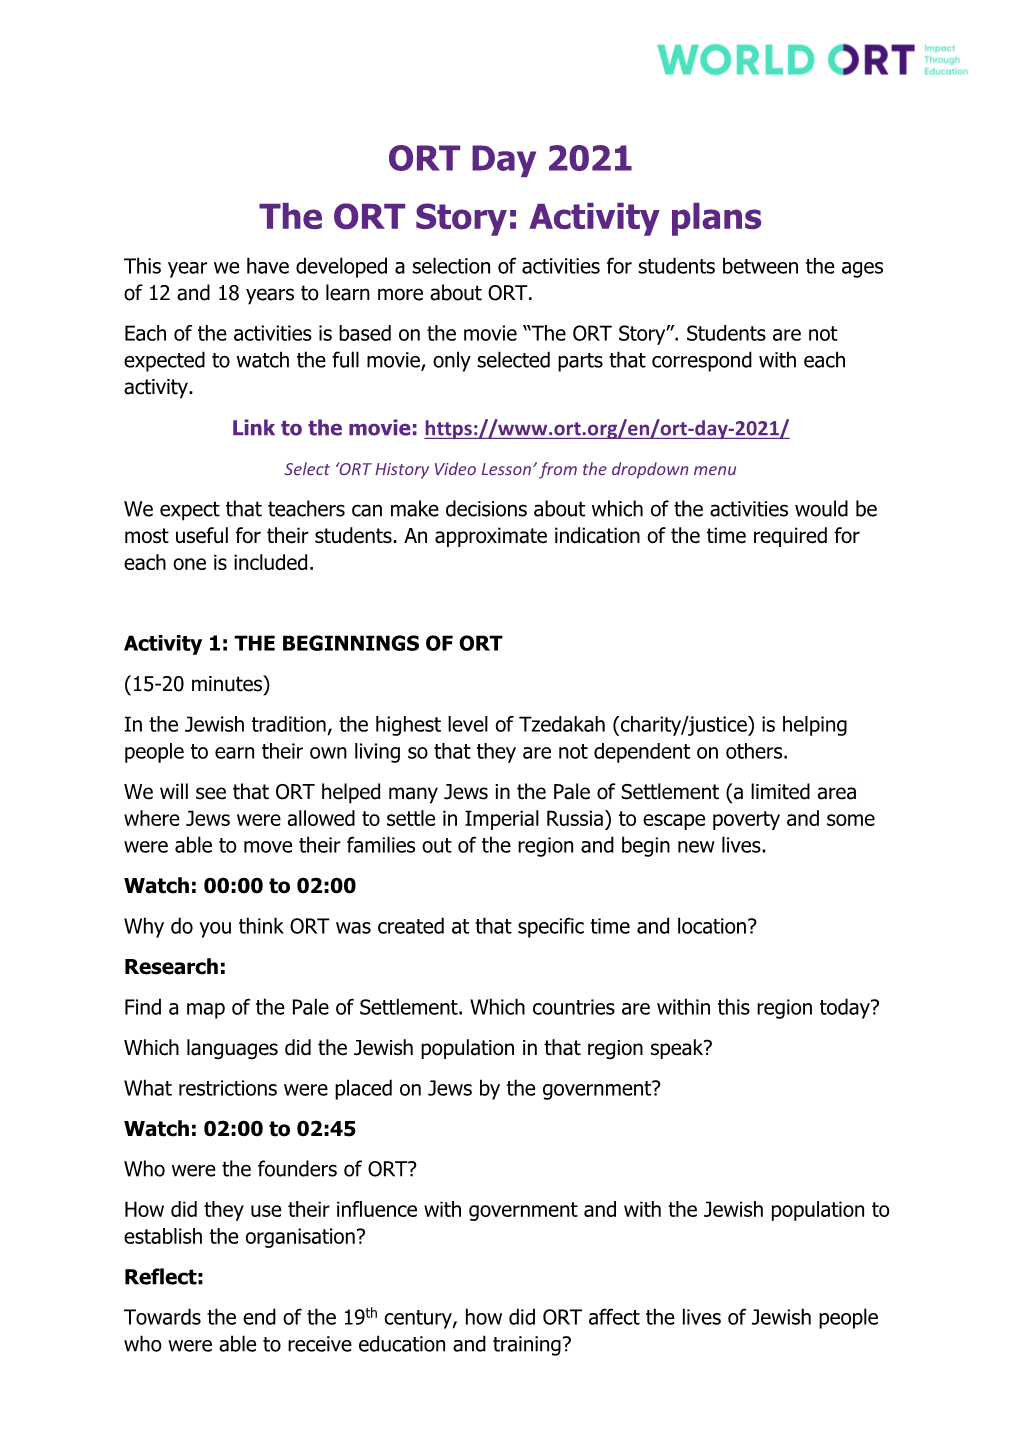 ORT Day 2021 History Lesson Activity Plan